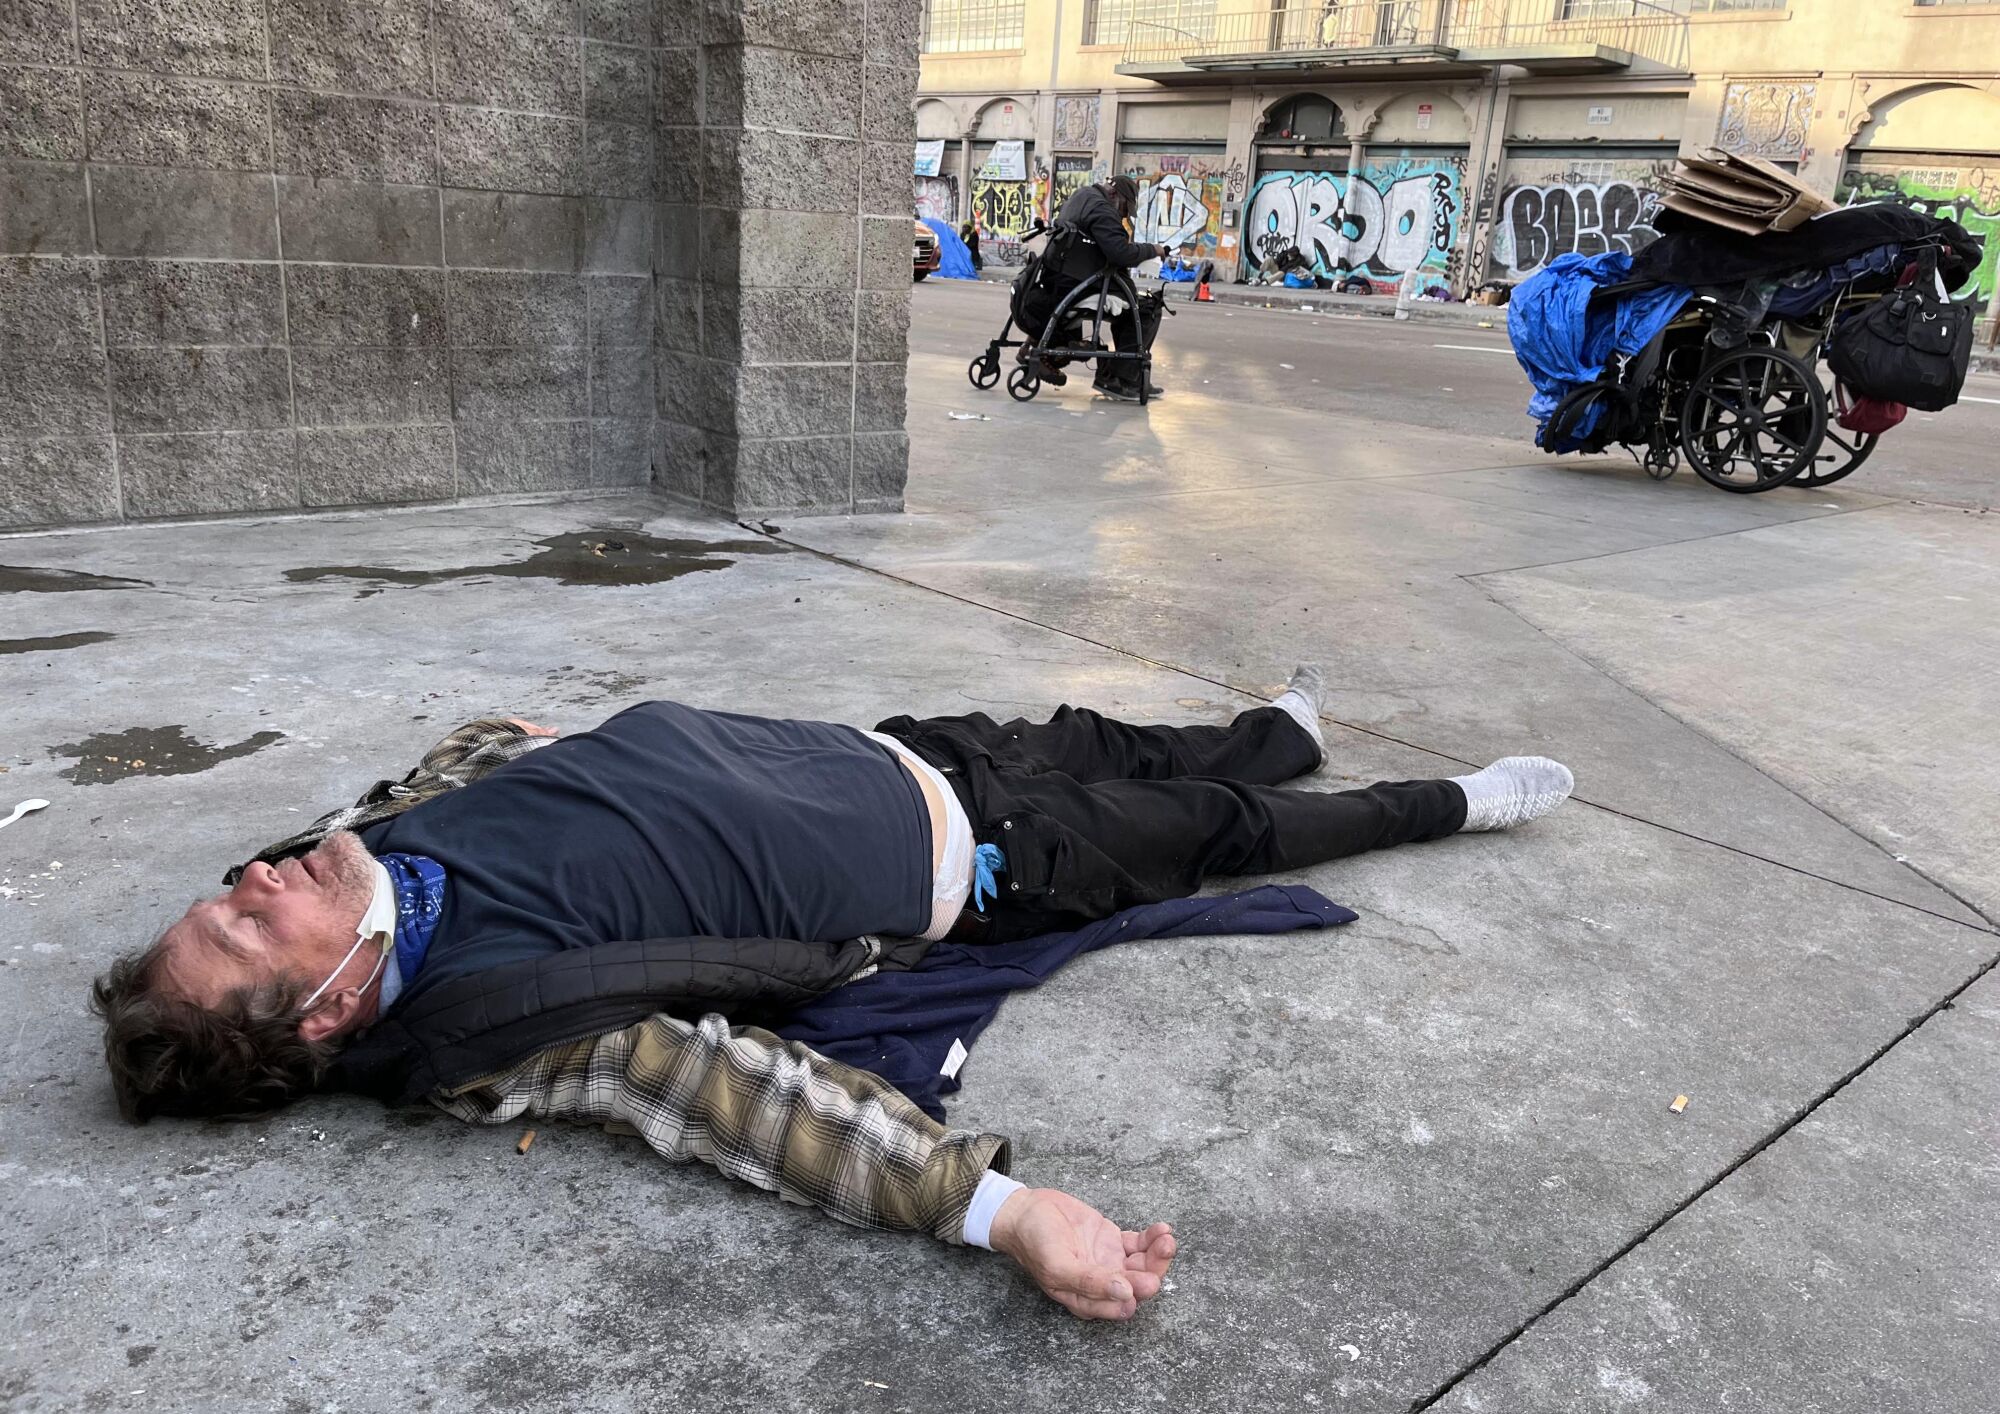 A homeless man is passed out on a sidewalk near a wheelchair.